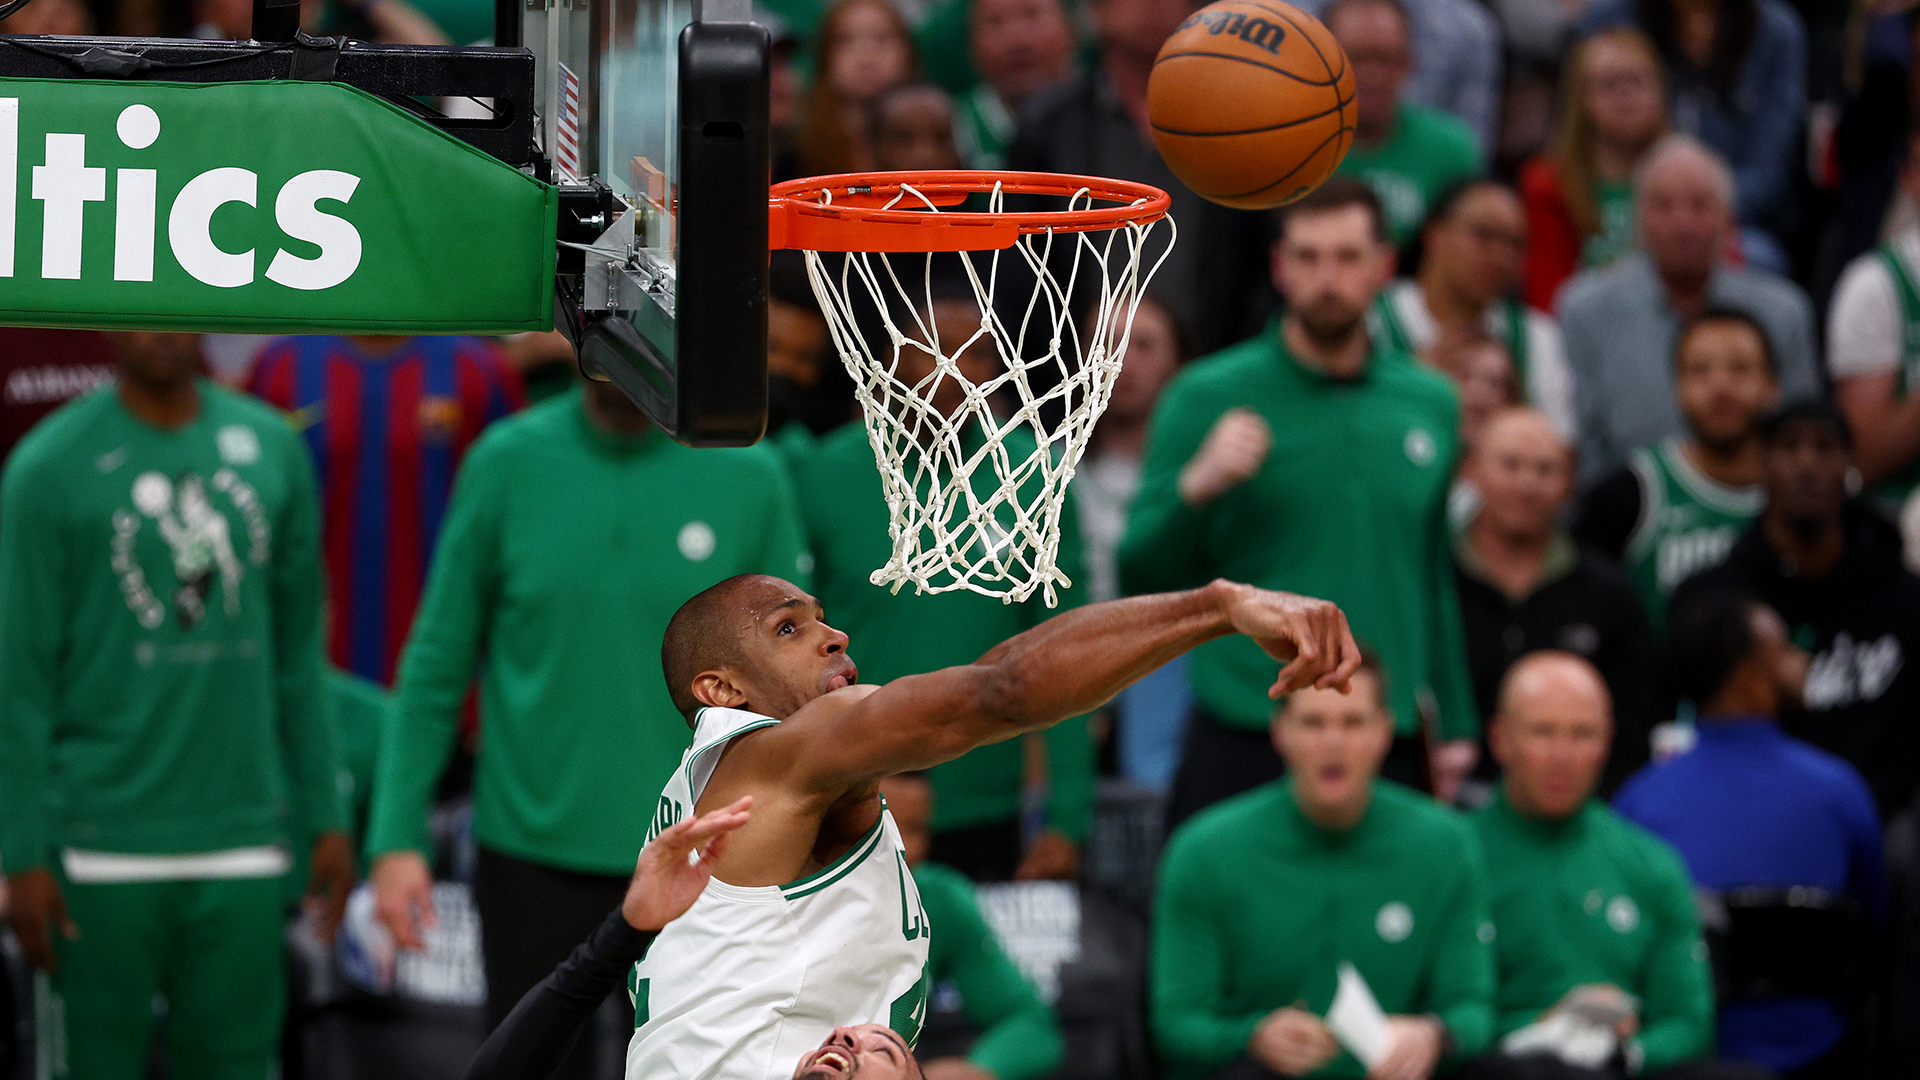 Al Horford #42 of the Boston Celtics blocks a shot by Caleb Martin #16 of the Miami Heat during the fourth quarter in Game Four of the 2022 NBA Playoffs Eastern Conference Finals at TD Garden on May 23, 2022 in Boston, Massachusetts.